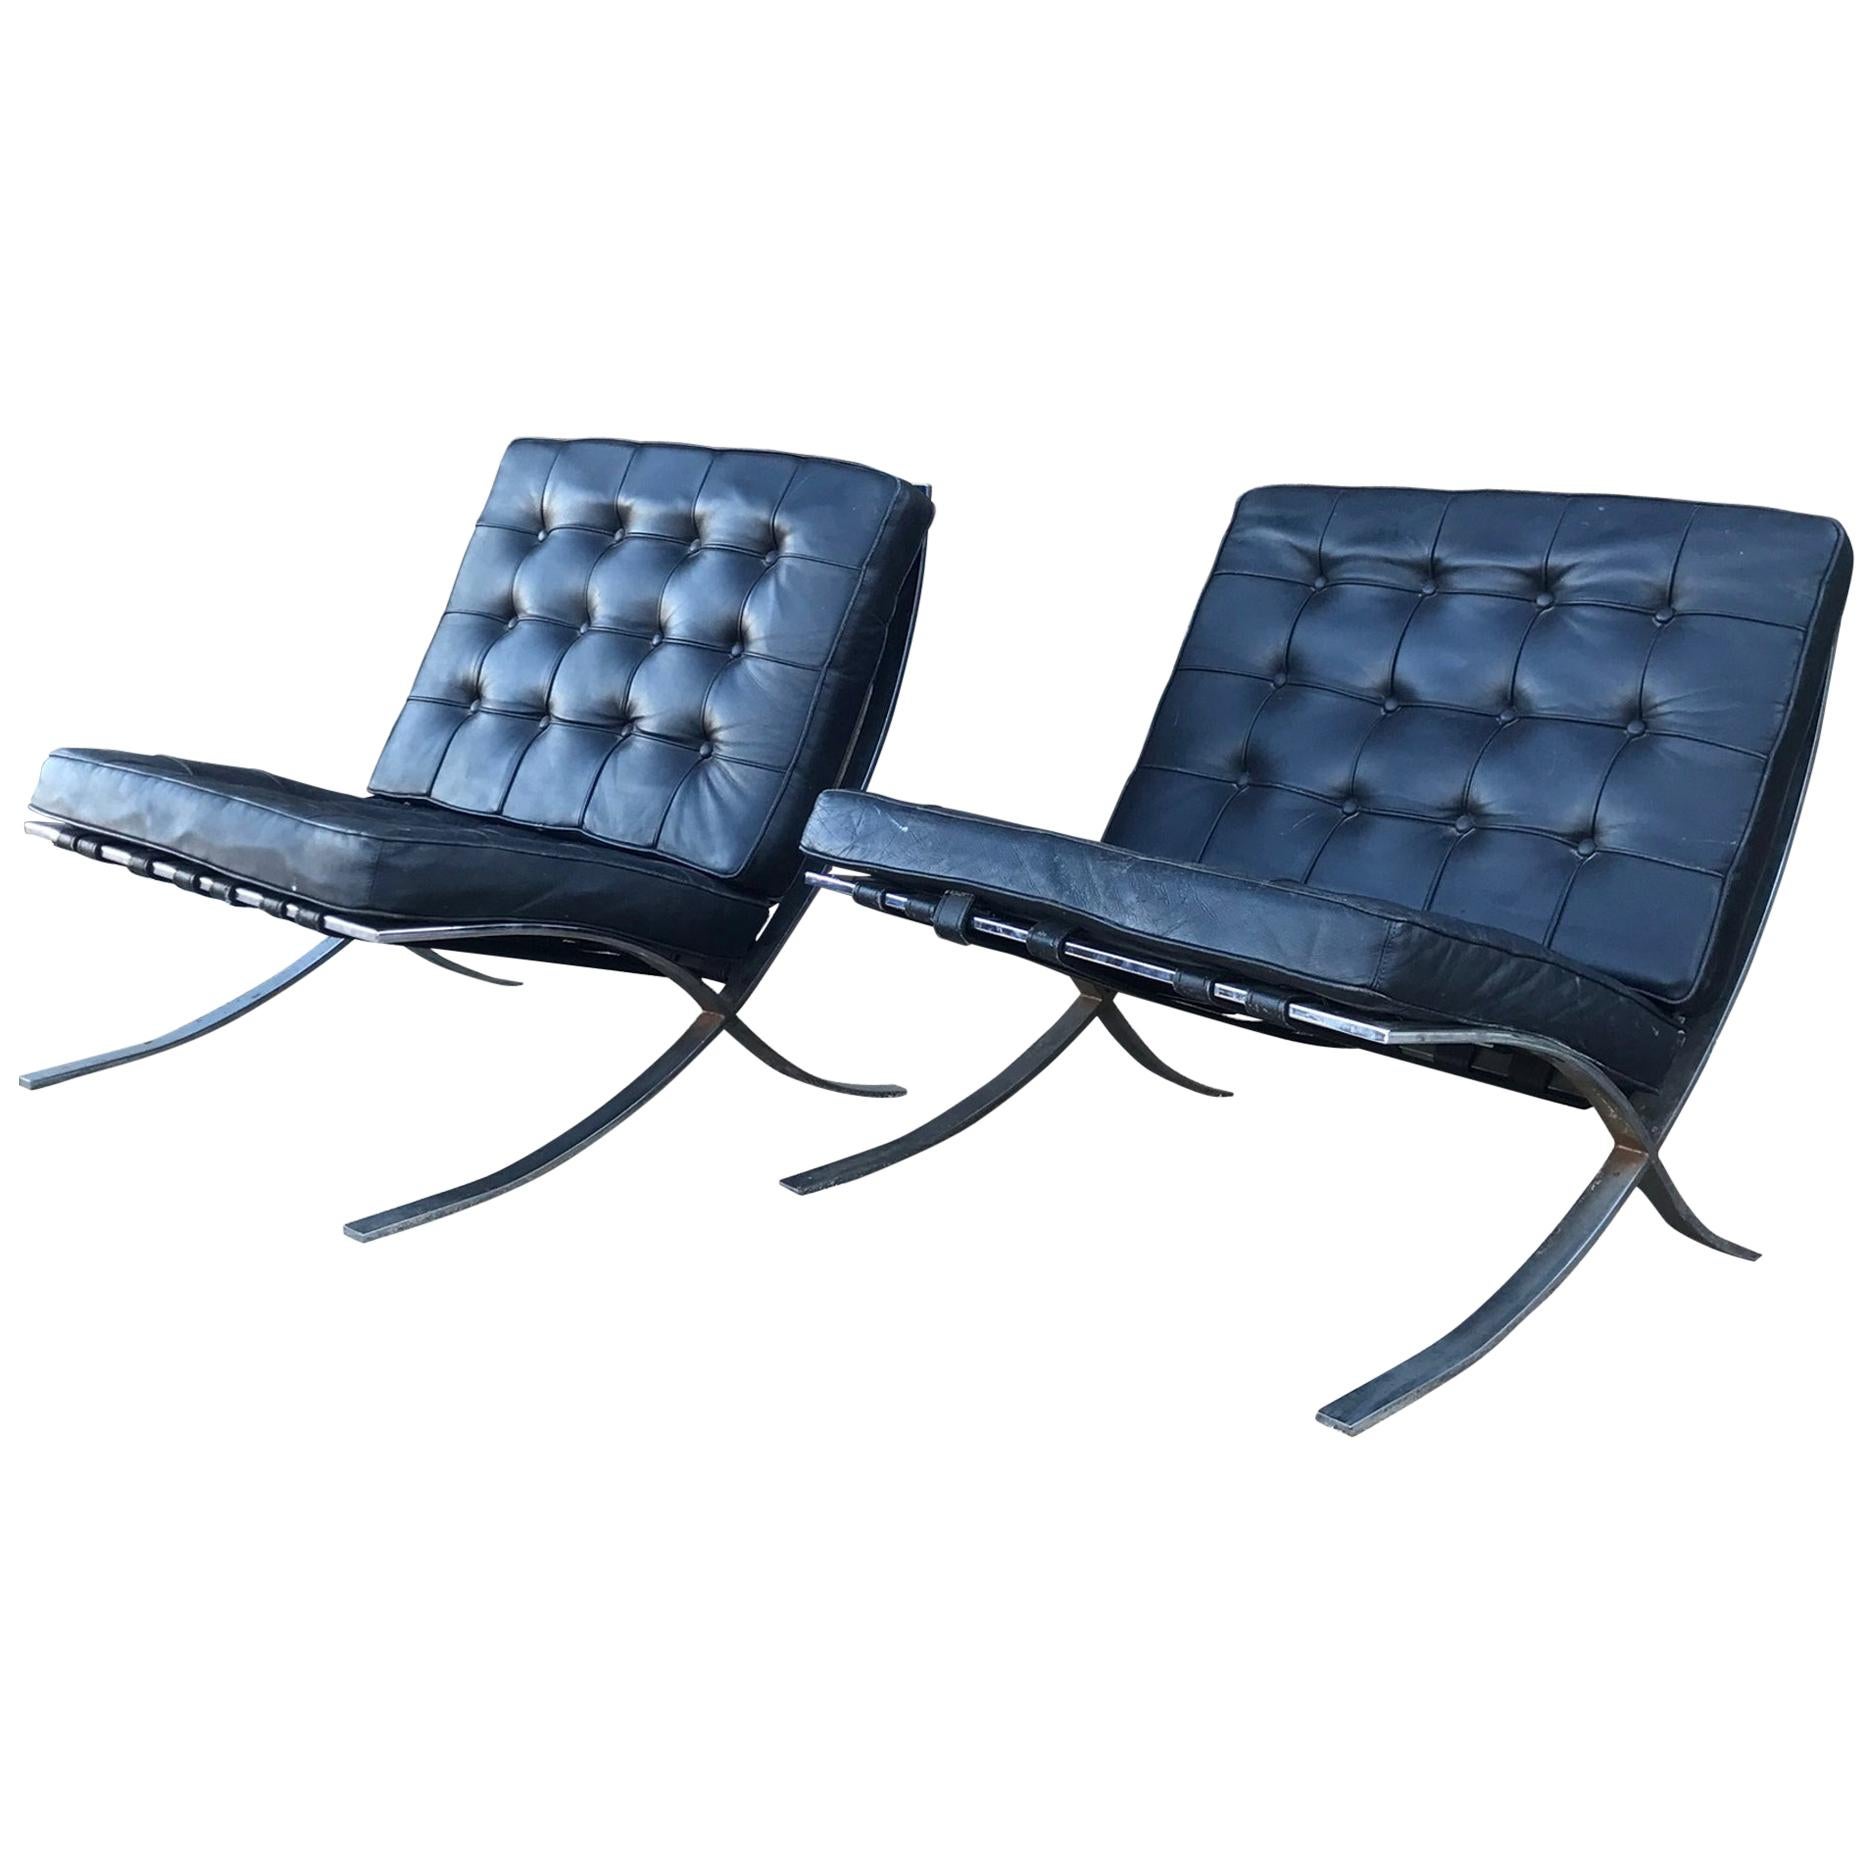 Hippest Black Barcelona Leather Lounge Chairs designer Mies van der Rohe 1970s